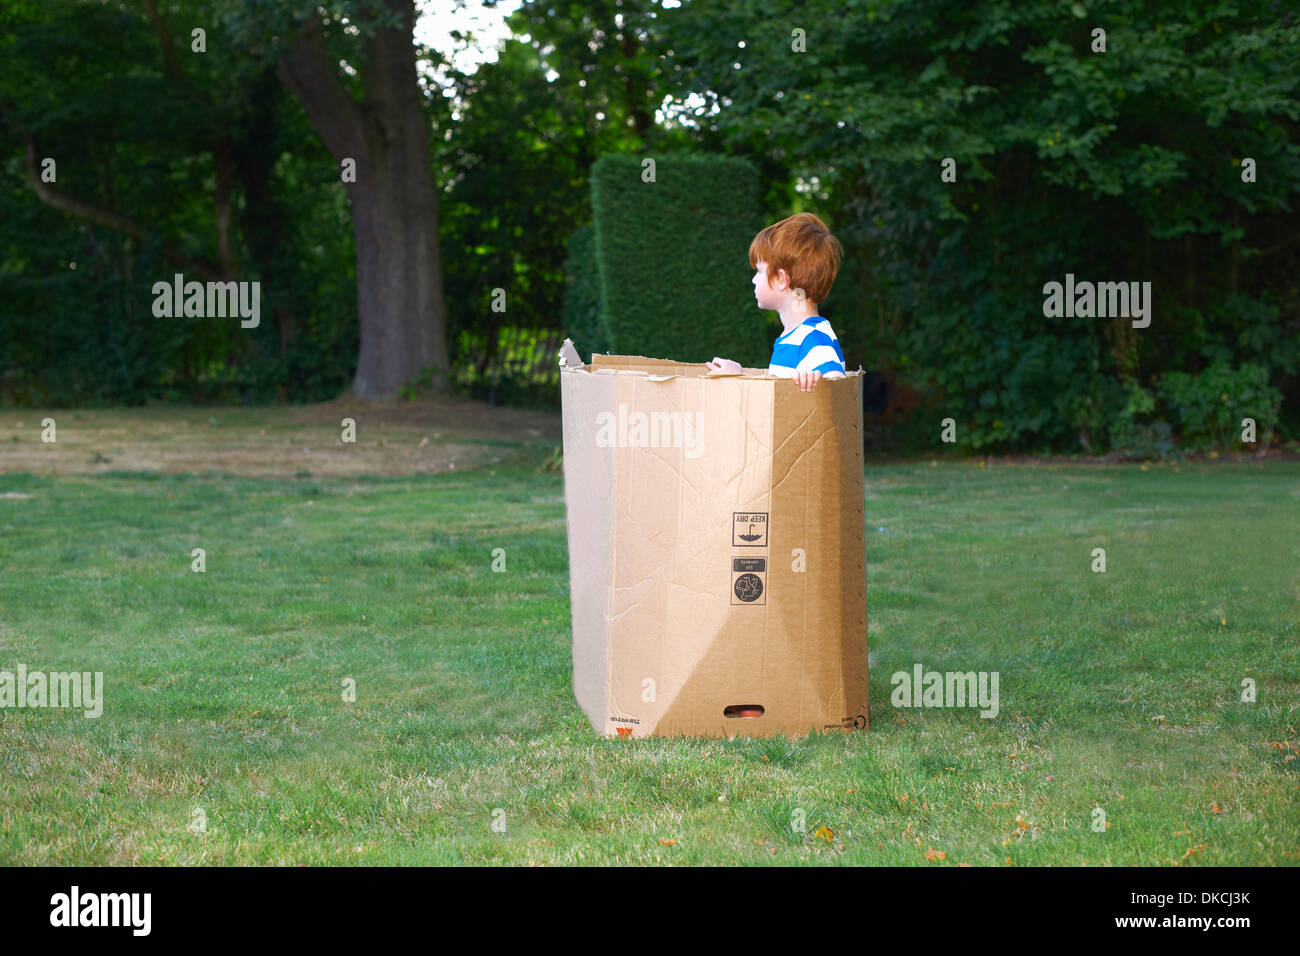 Young boy watching from cardboard box in garden Stock Photo